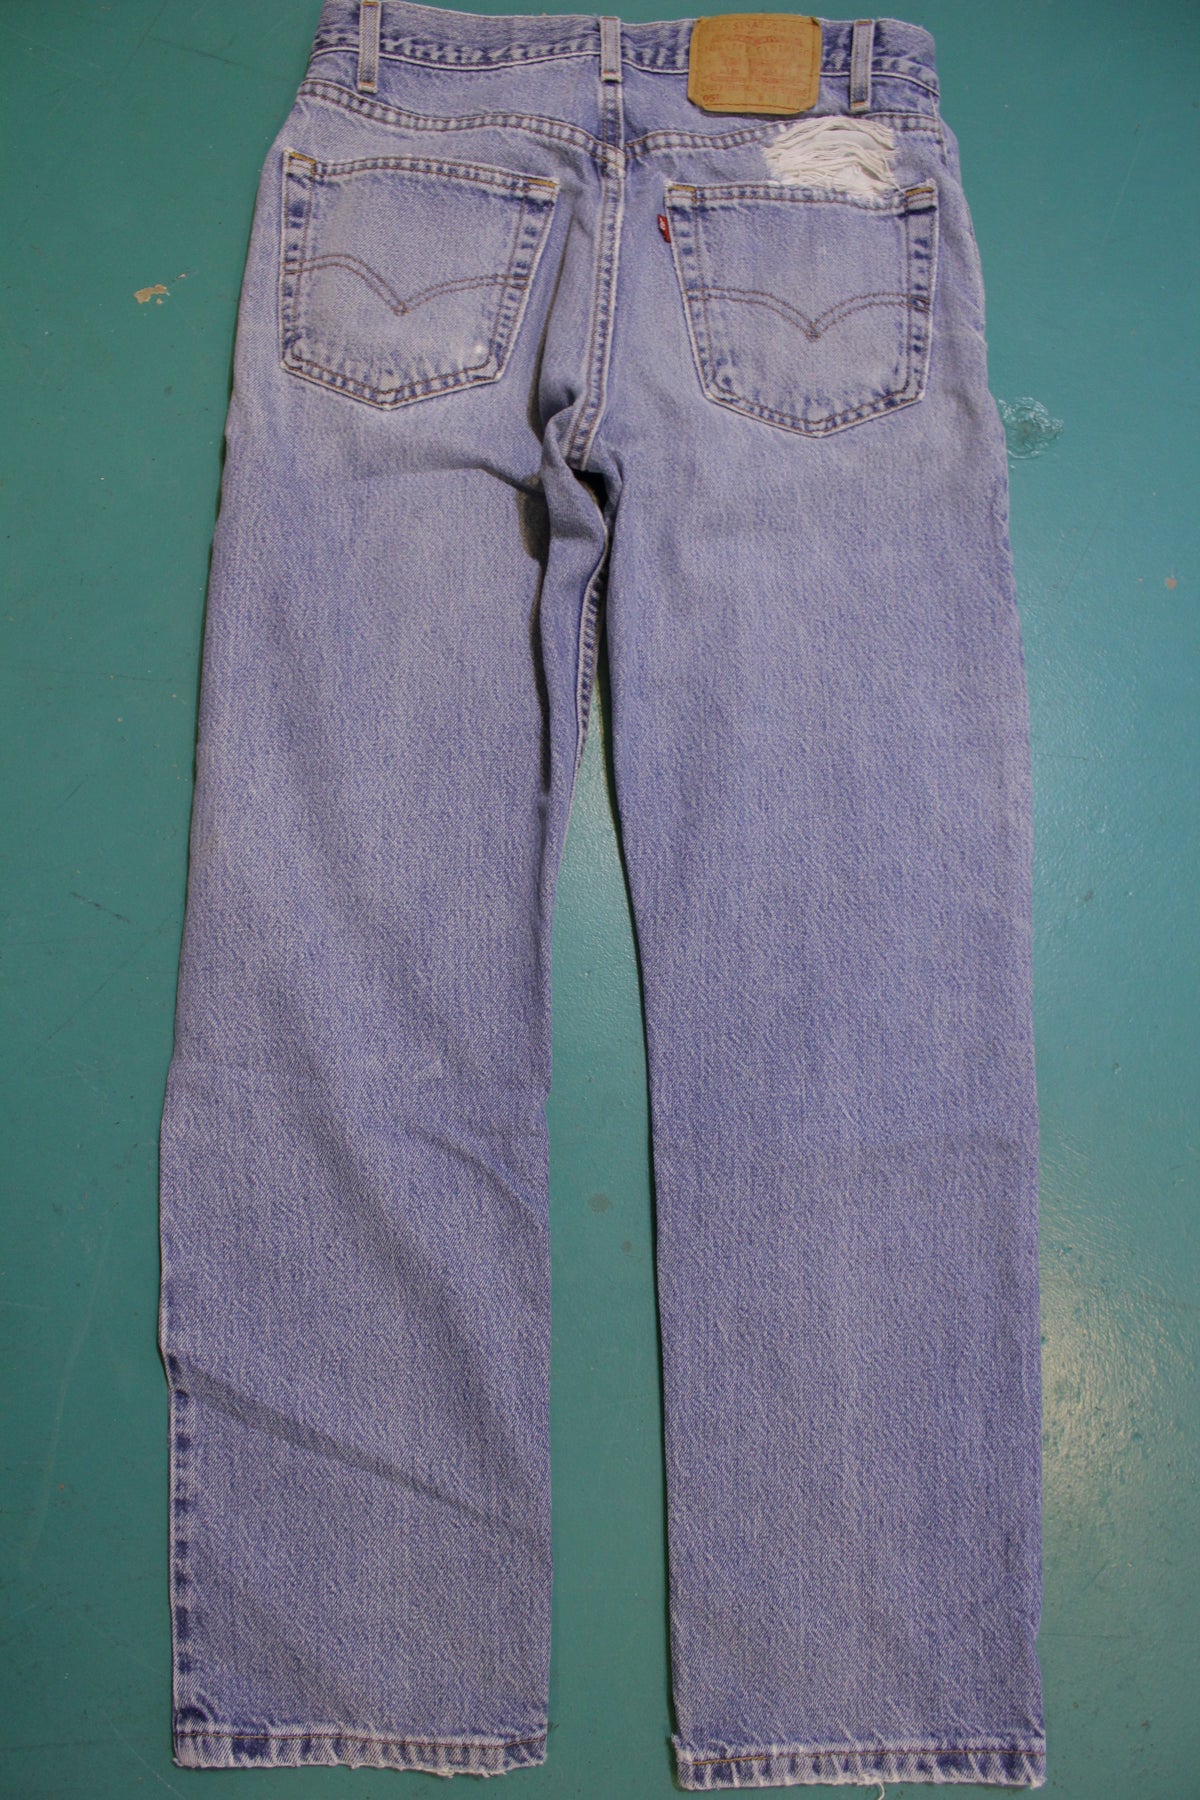 Levis 505 90s Red Tag Made in USA Vintage Blue Denim Jeans 32x30 Distressed Grunge